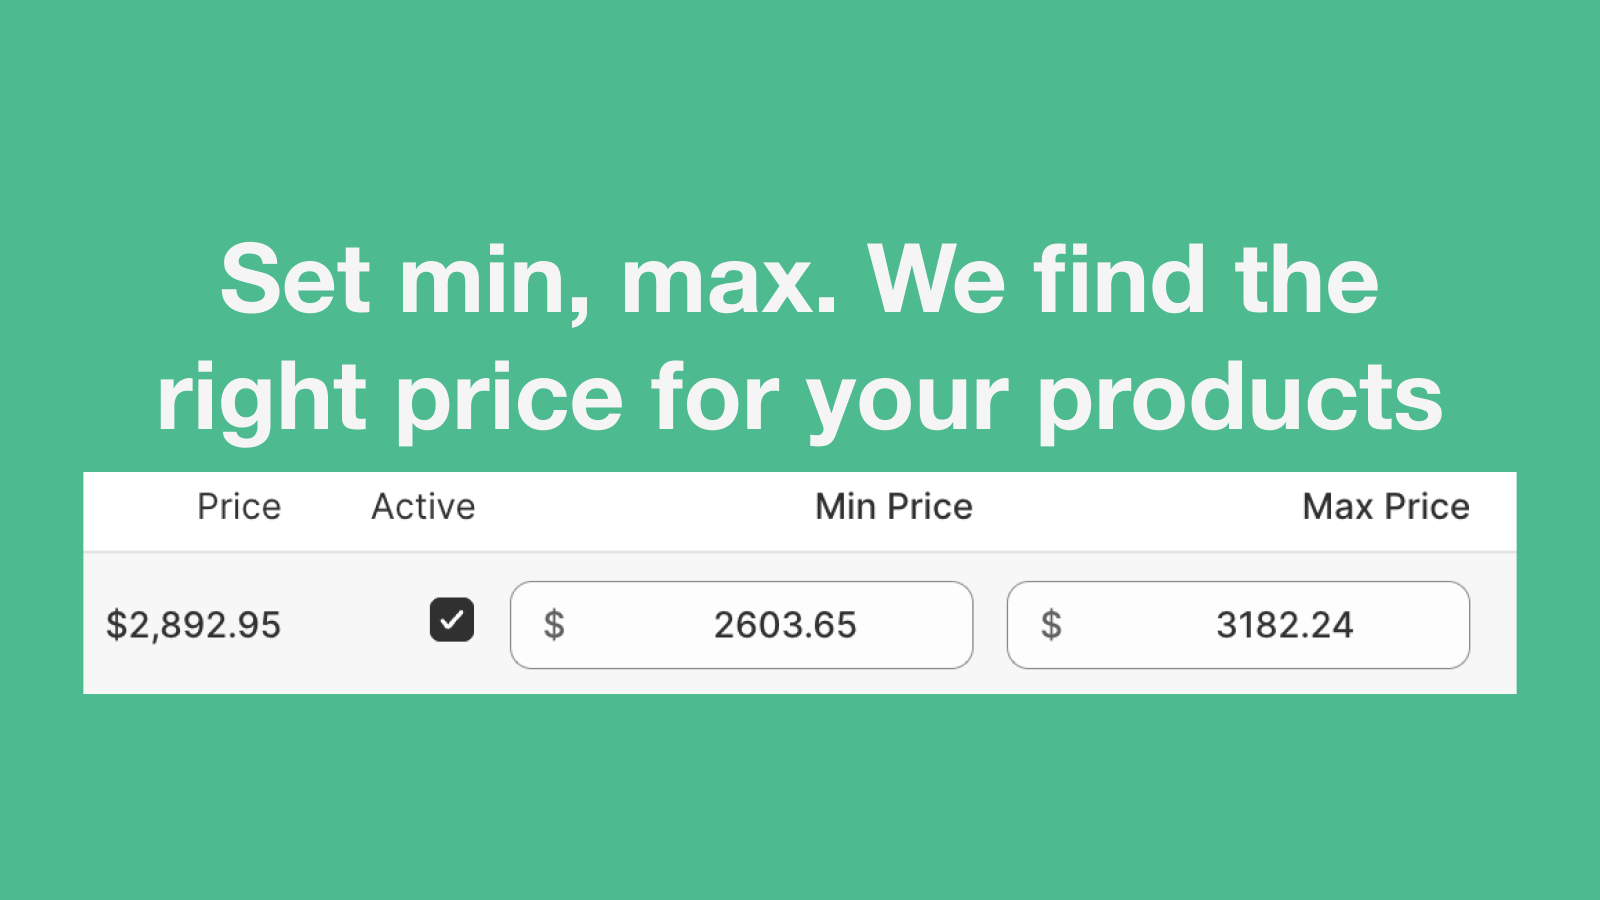 Set min, max. We find the right price for your products